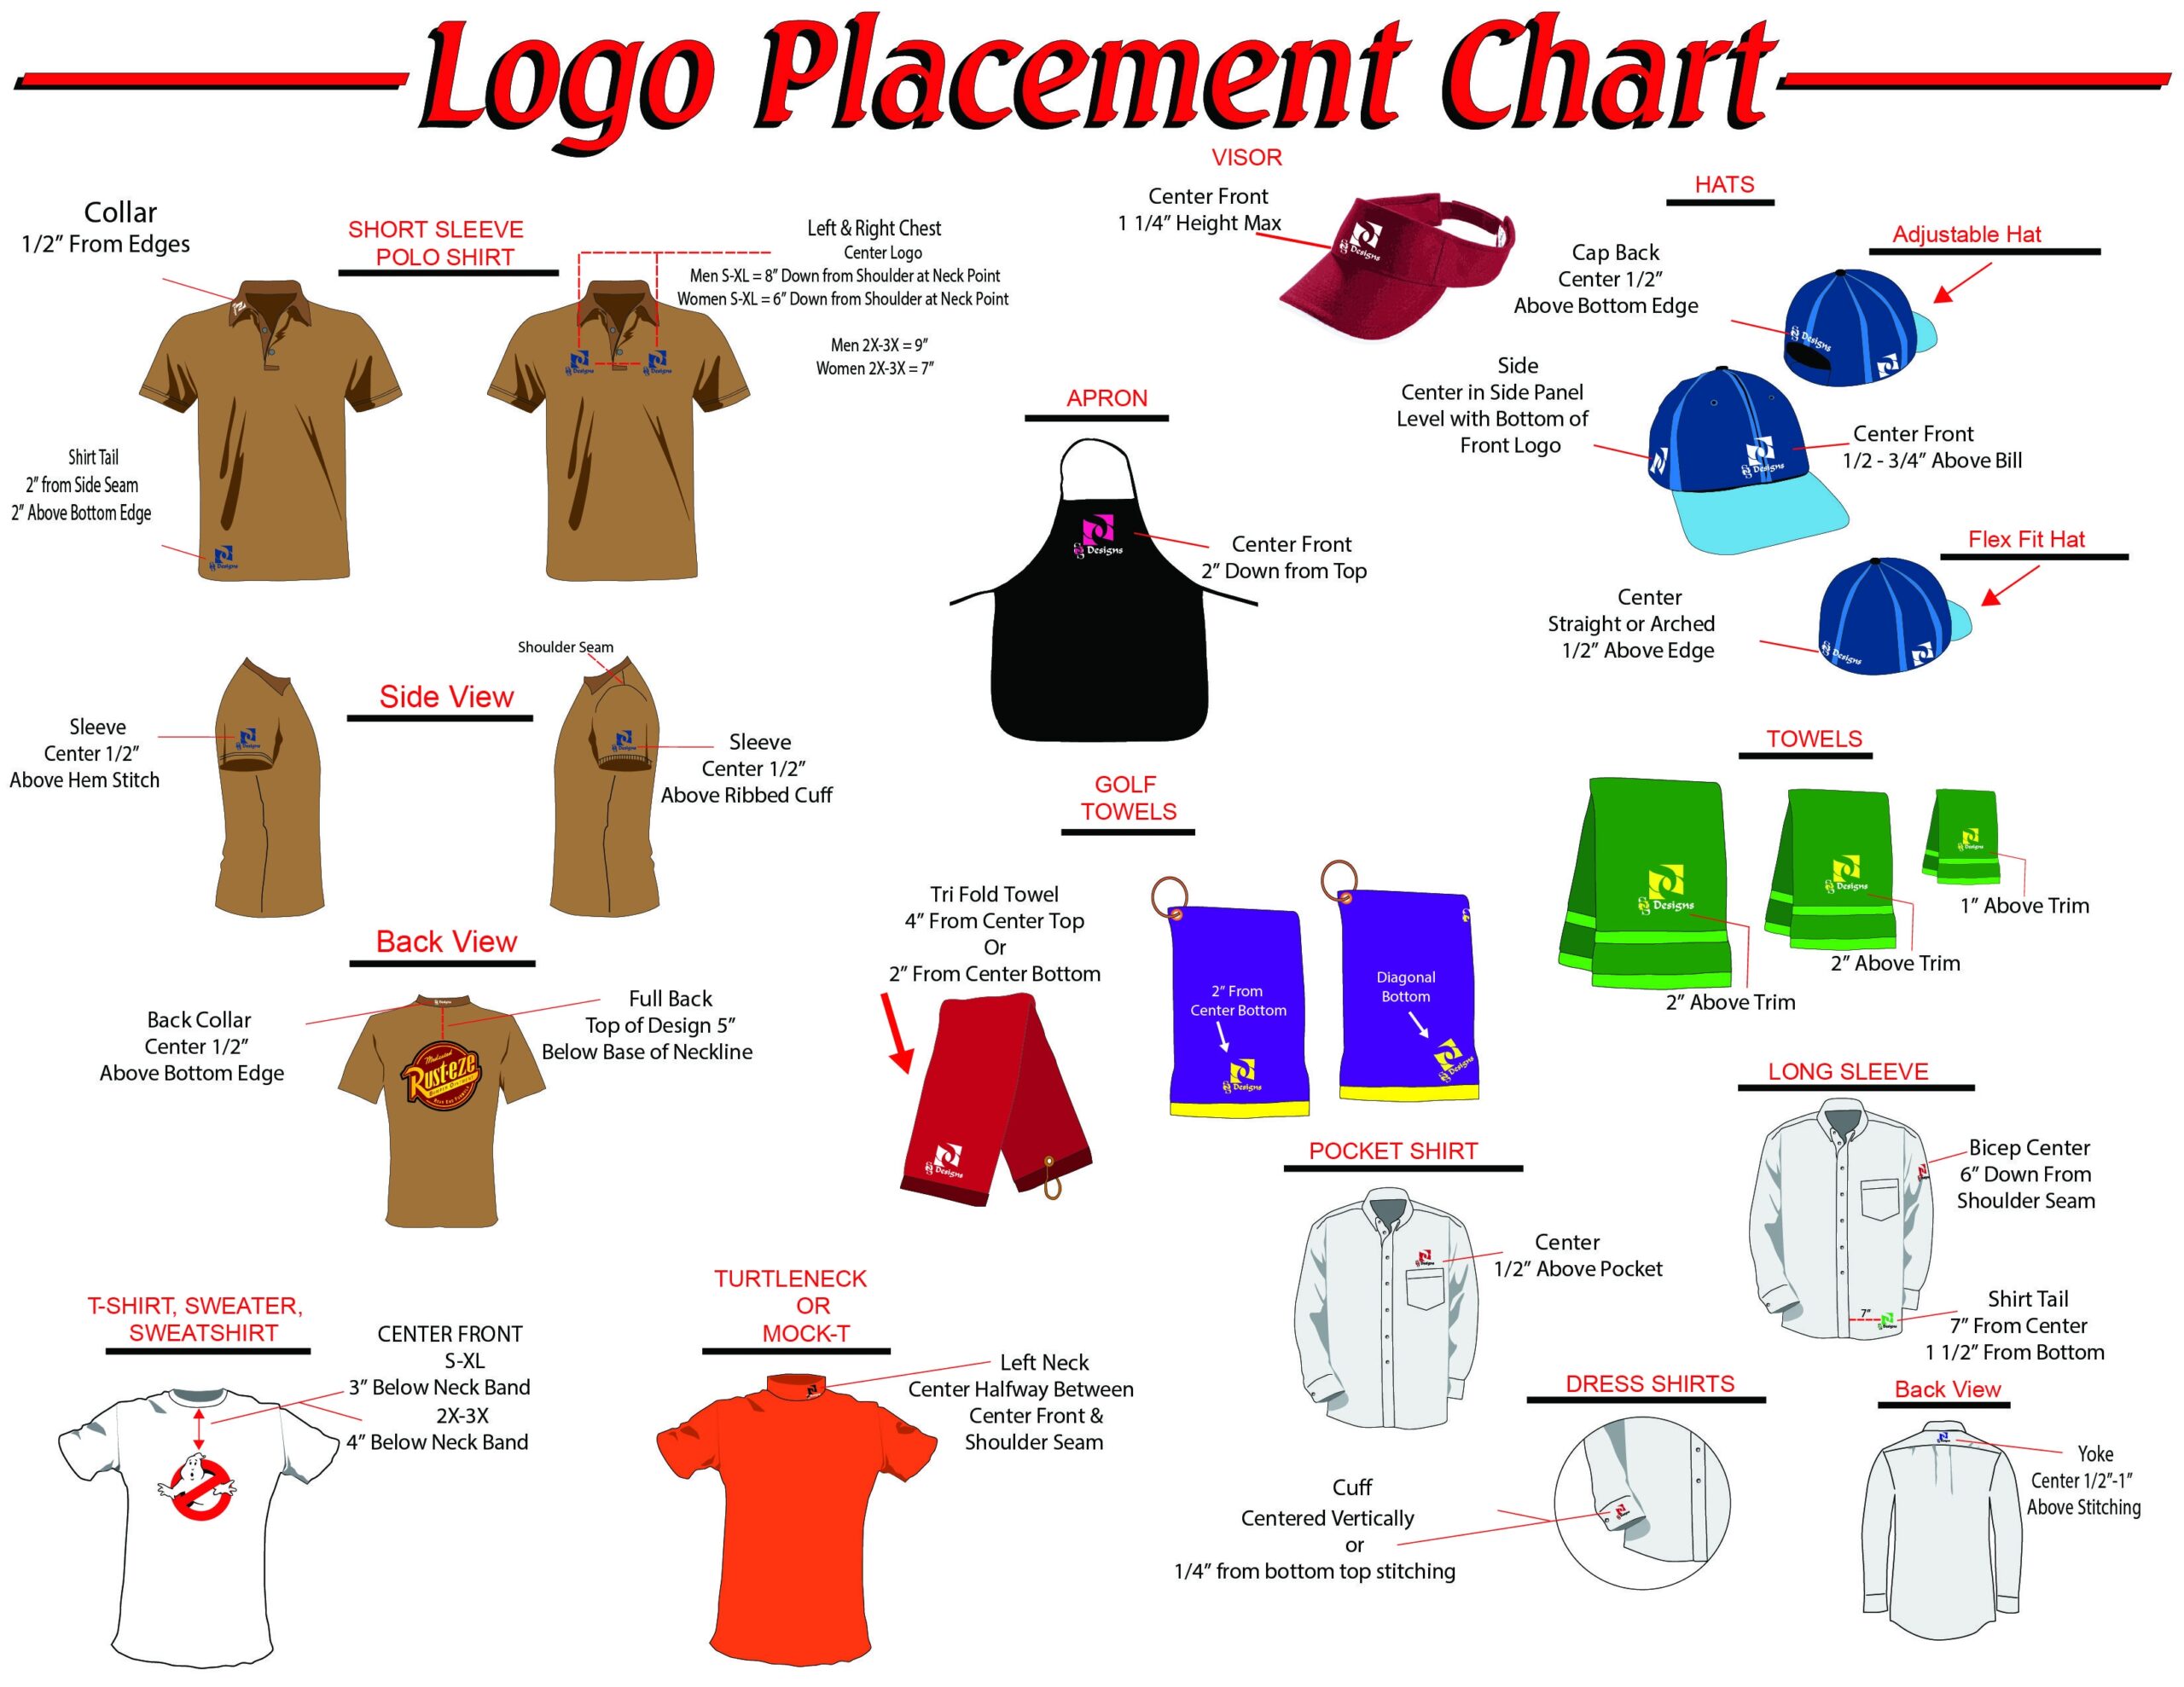 Embroidery Logo Placement Decoration Placement Charts For Shirts Hats Aprons Etc Logo Placement Embroidery Monogram Tshirt Printing Business